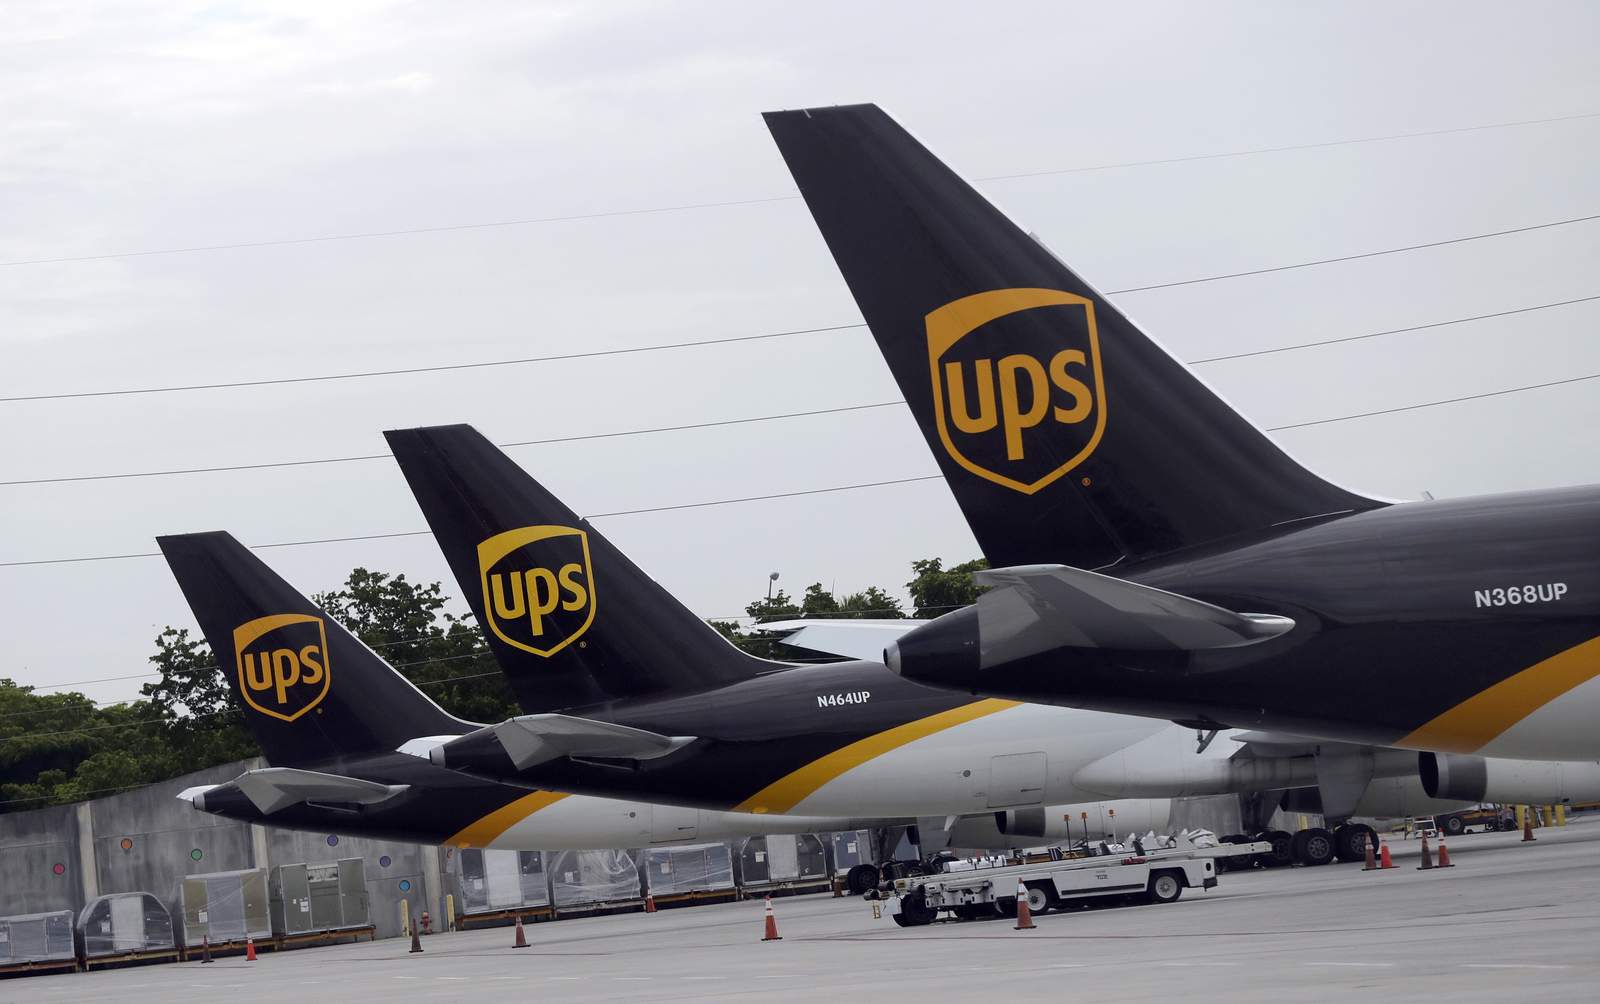 Online shopping surge delivers record revenue for UPS